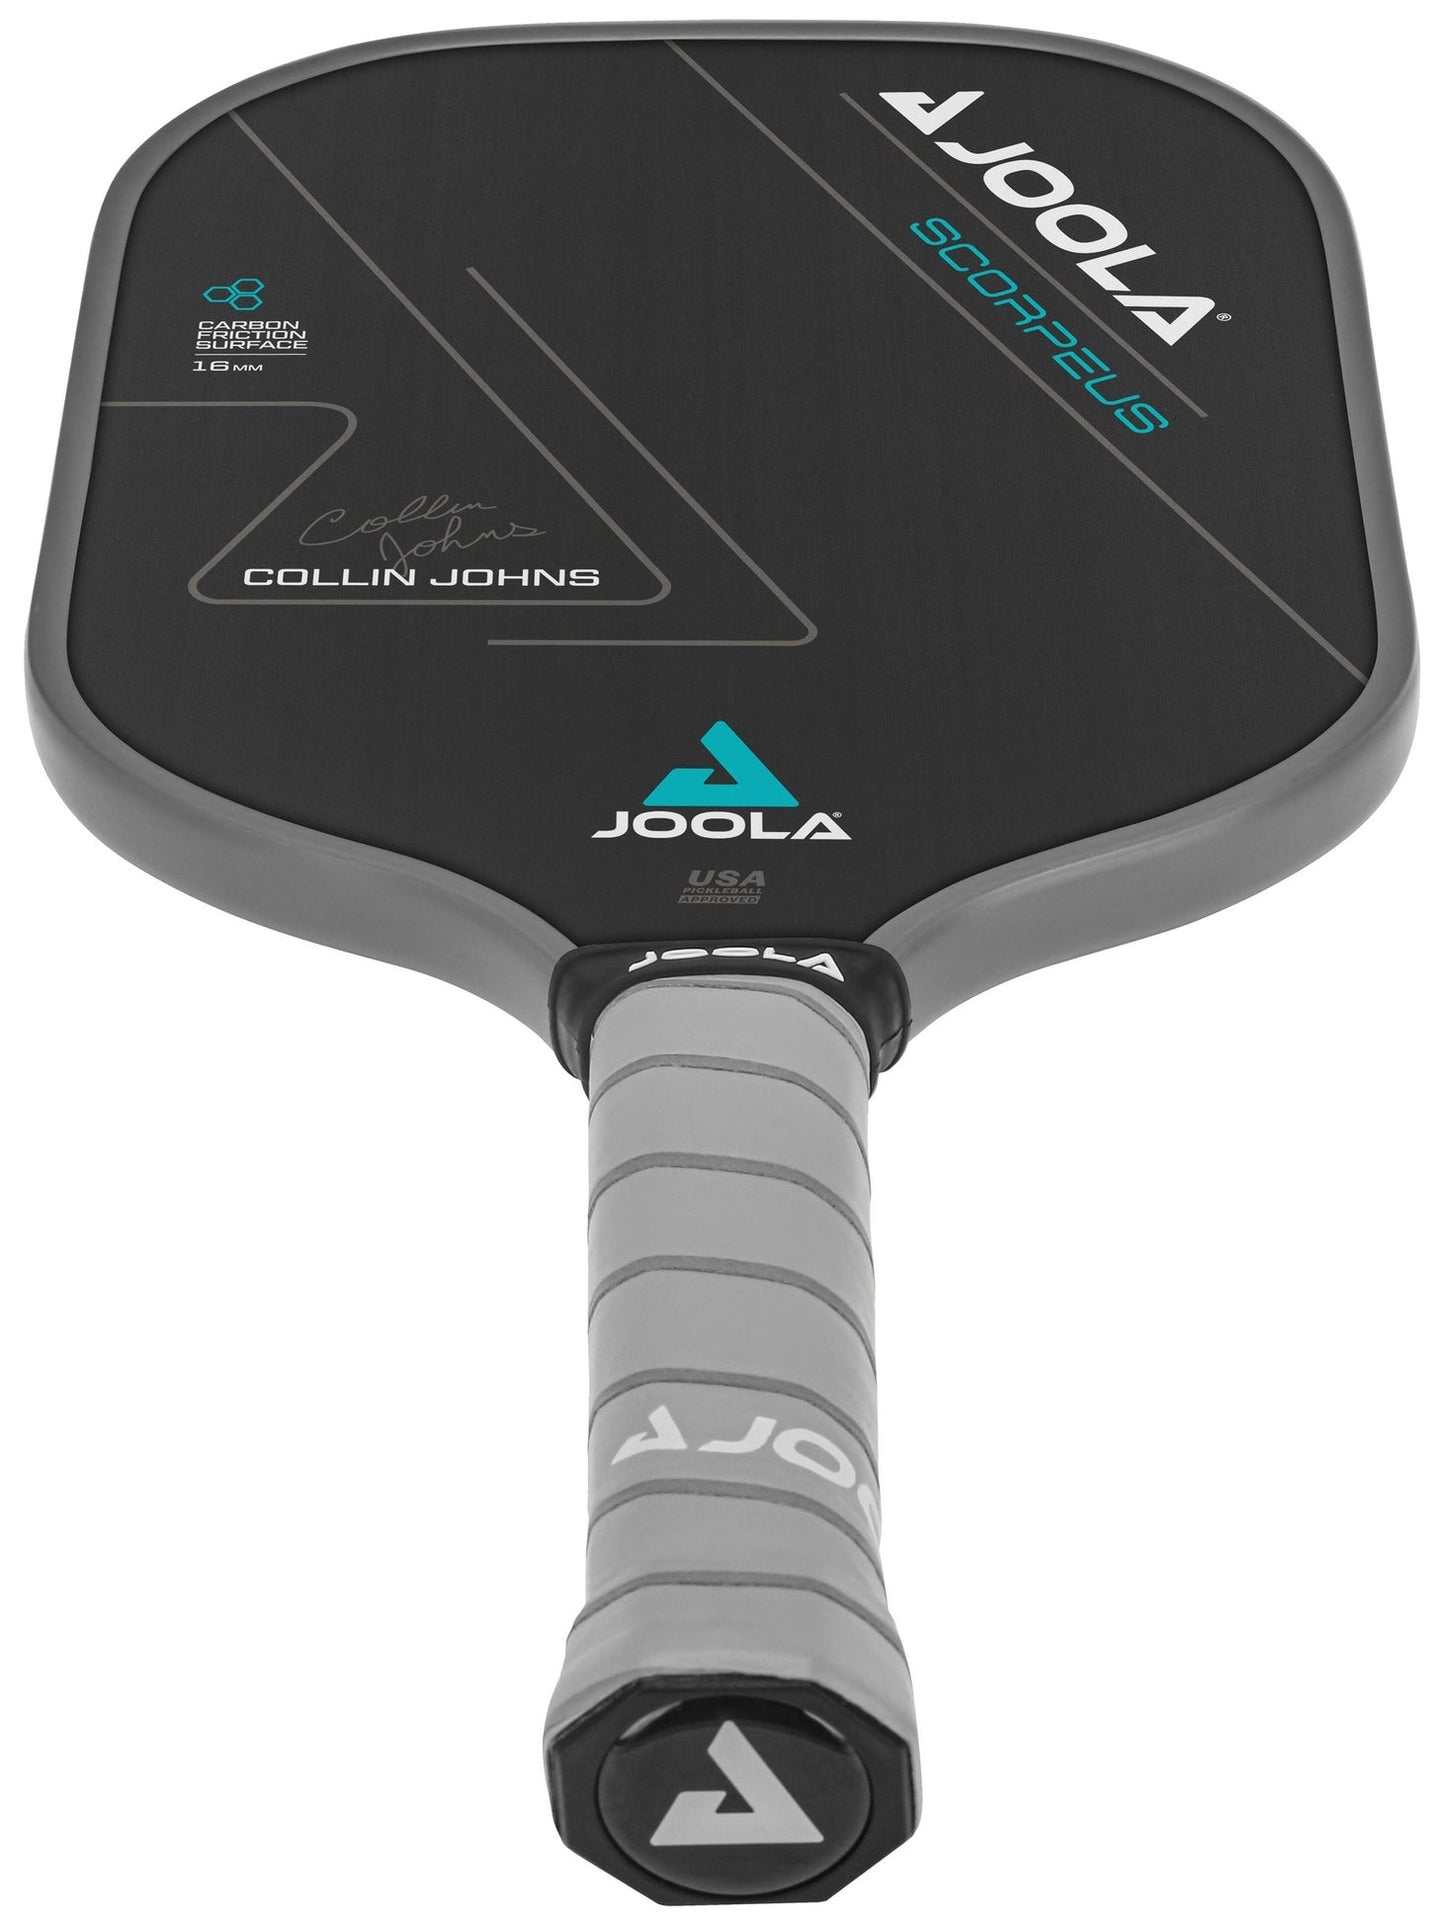 A JOOLA Collin Johns Scorpeus CFS 16mm Pickleball Paddle with black and grey handles available at a pickleball store.